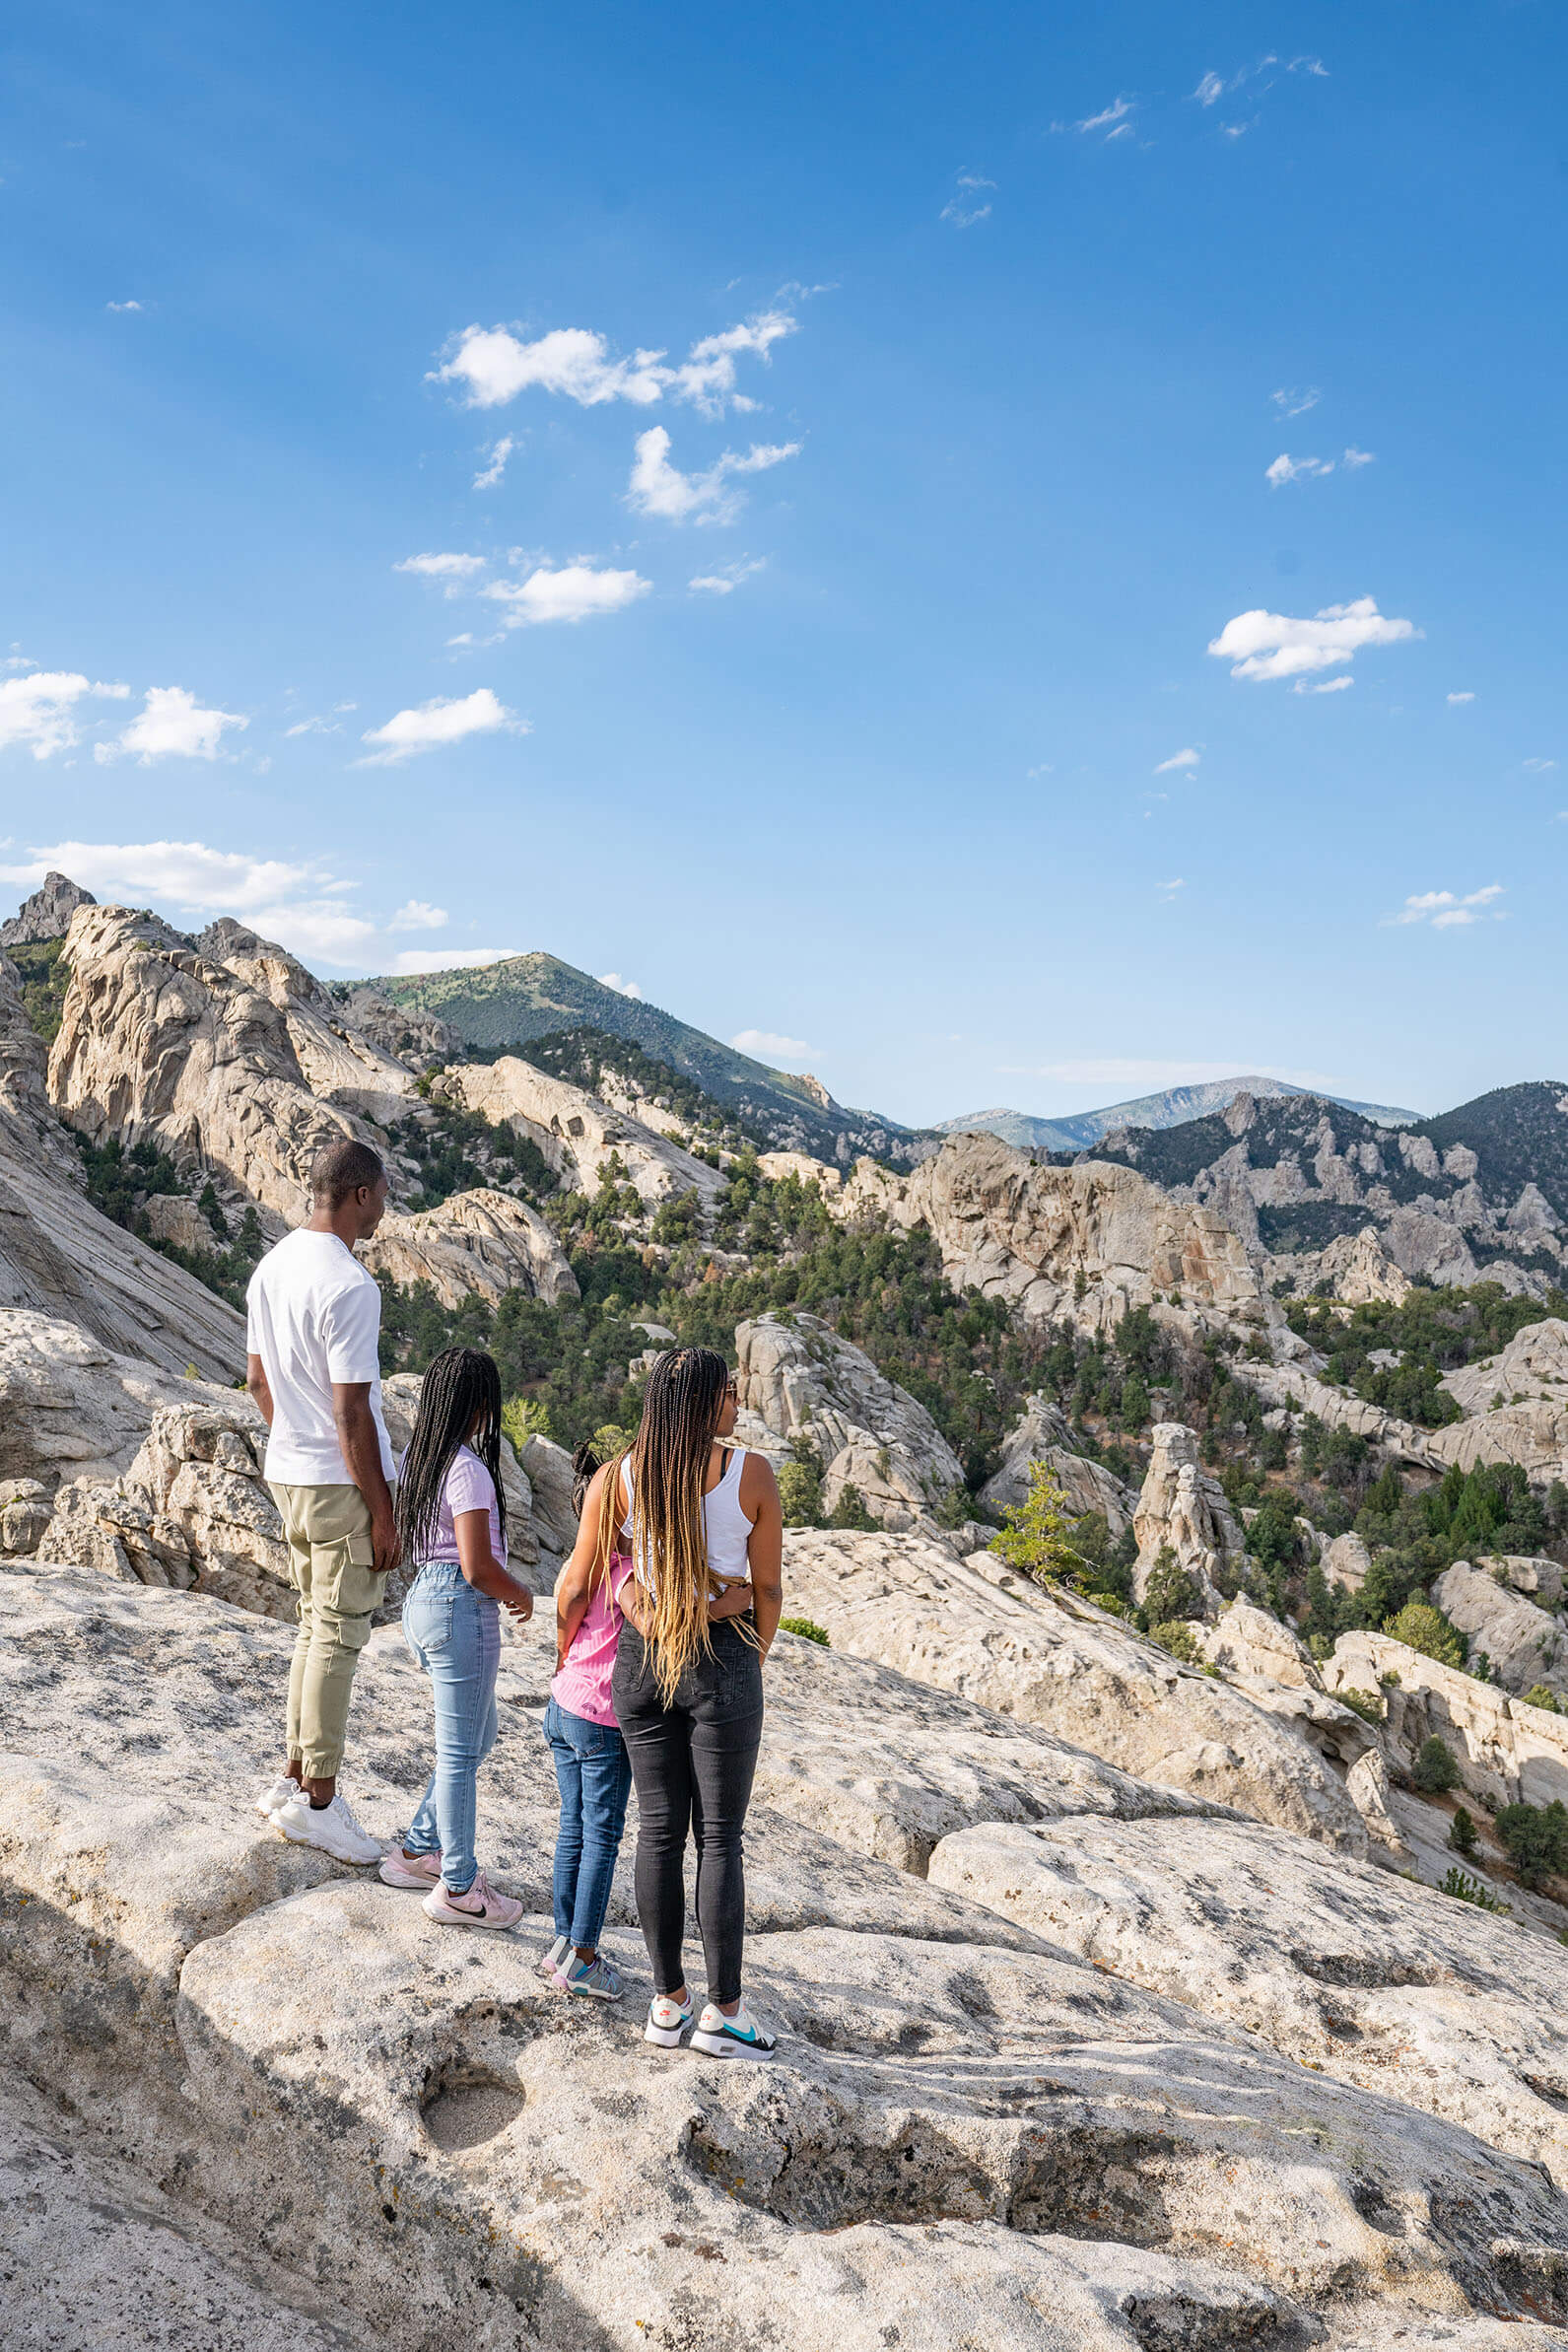 A family of four stand looking out over a scenic view at the City of Rocks.